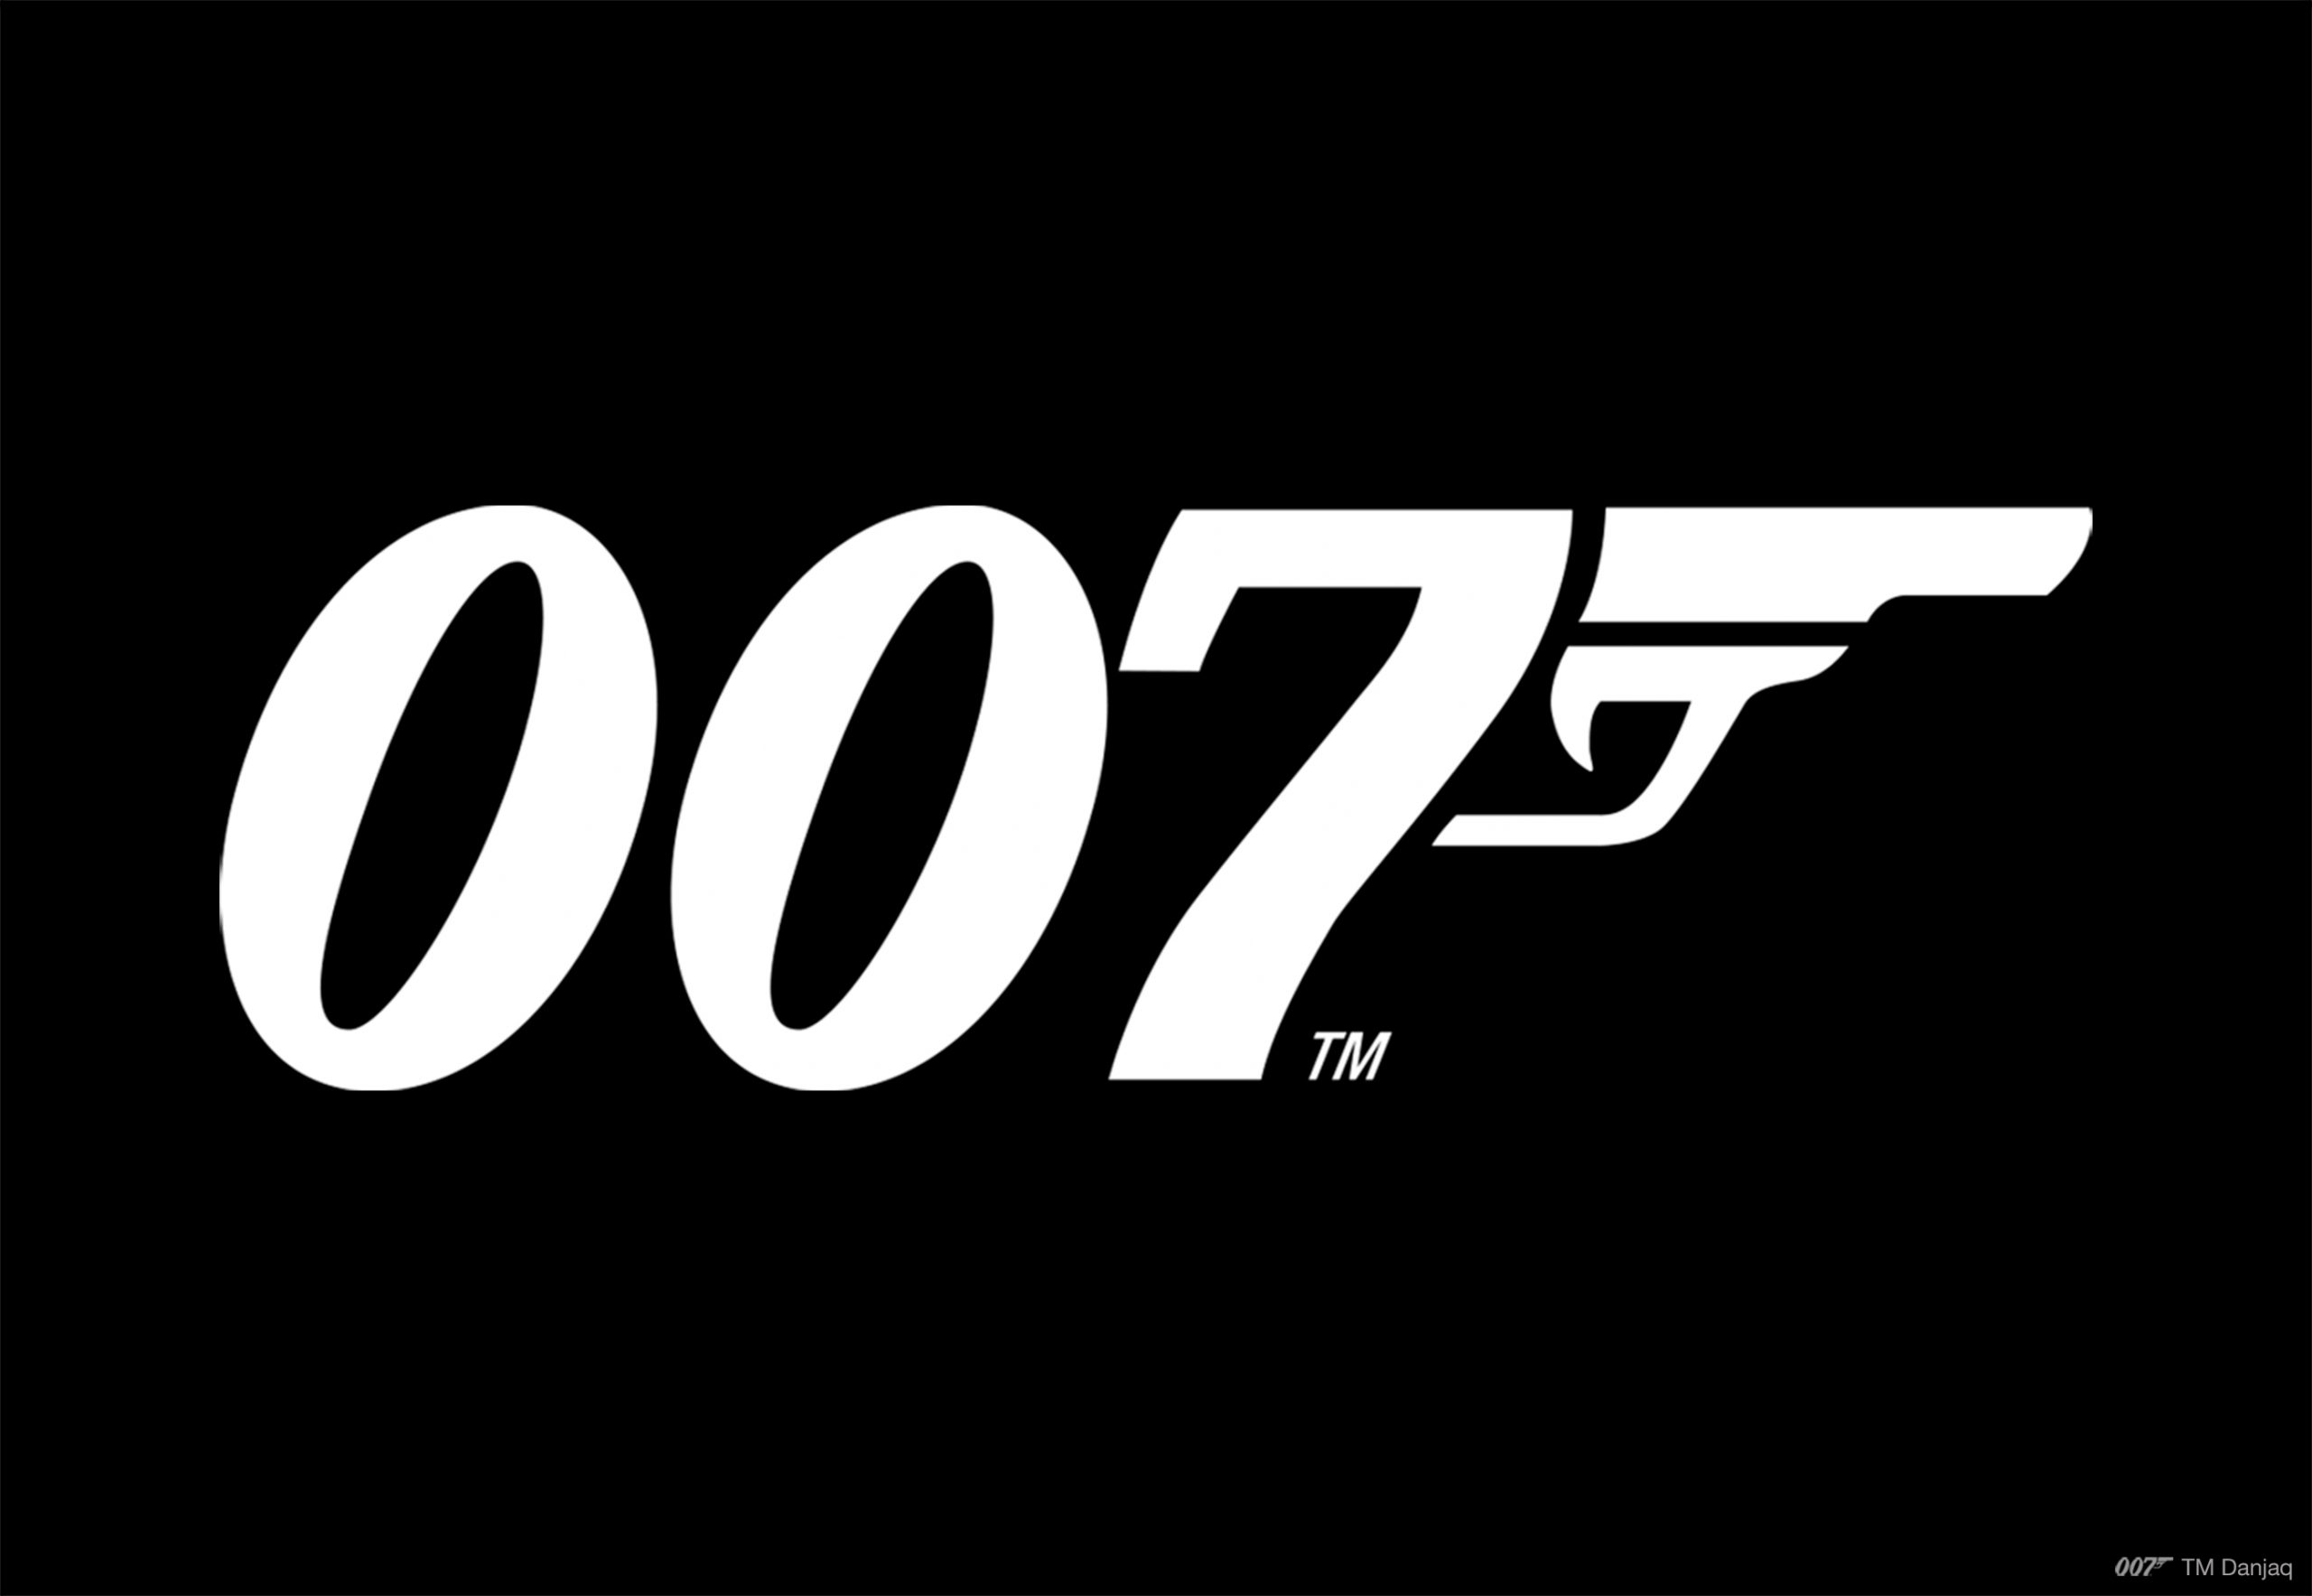 Licence to kill et Die another day dans "007 legends"